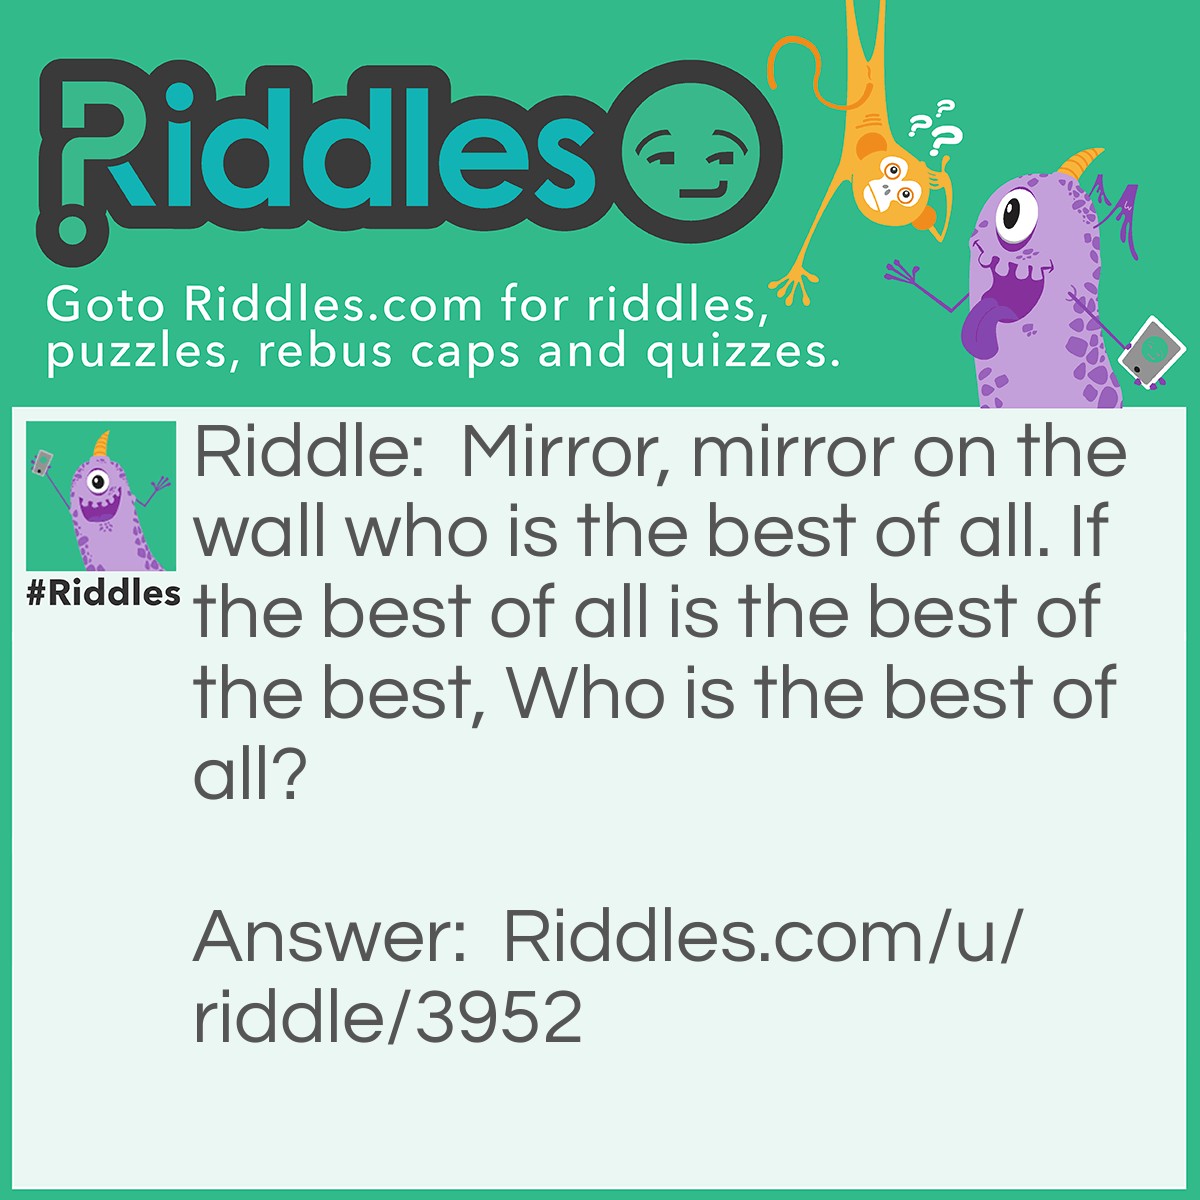 Riddle: Mirror, mirror on the wall who is the best of all. If the best of all is the best of the best, Who is the best of all? Answer: The Best of the Best is the best of all.